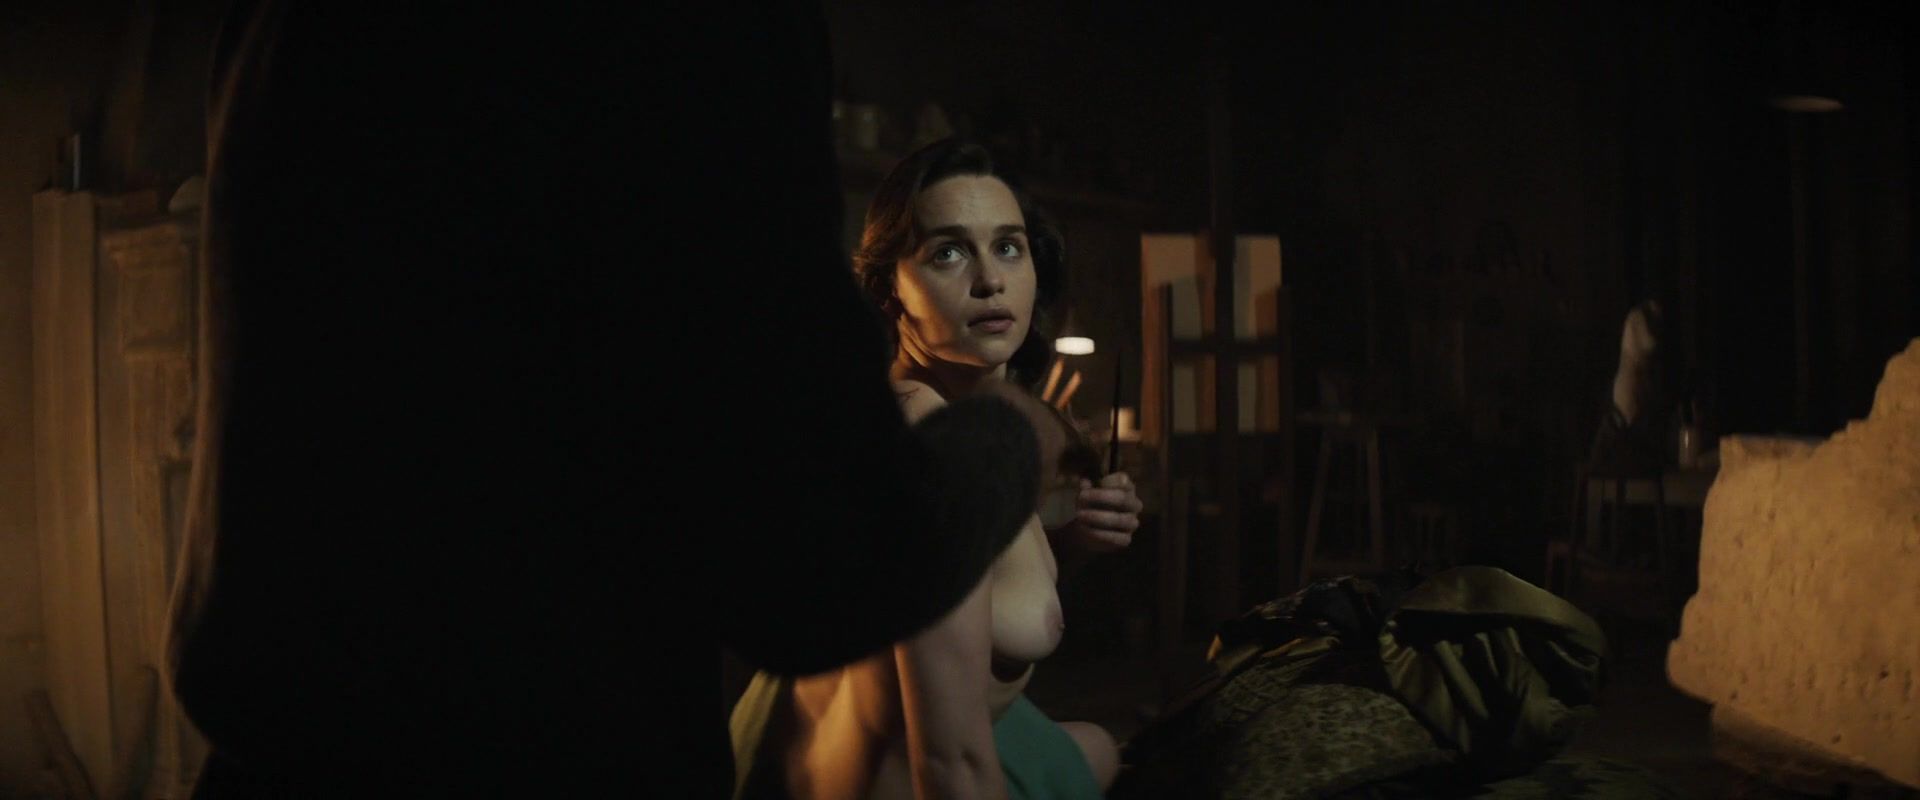 FreeAnalToons Naked Emilia Clarke in topless scene of the movie "Voice from the Stone" | Released in 2017 Solo Female